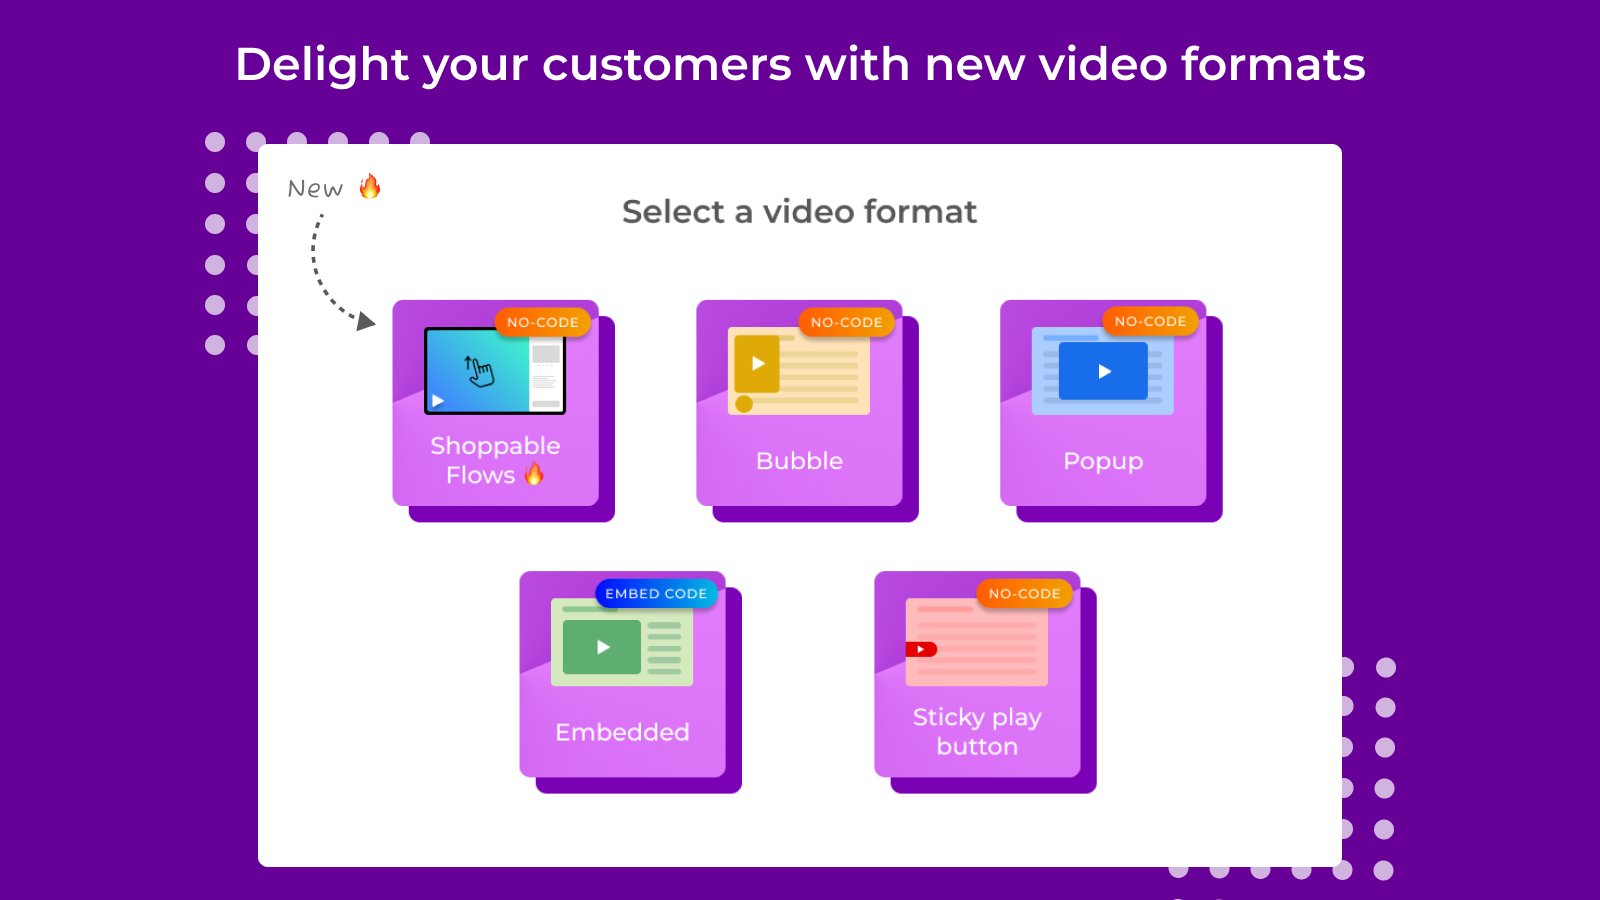 Select various video formats (floating, embedded, etc)